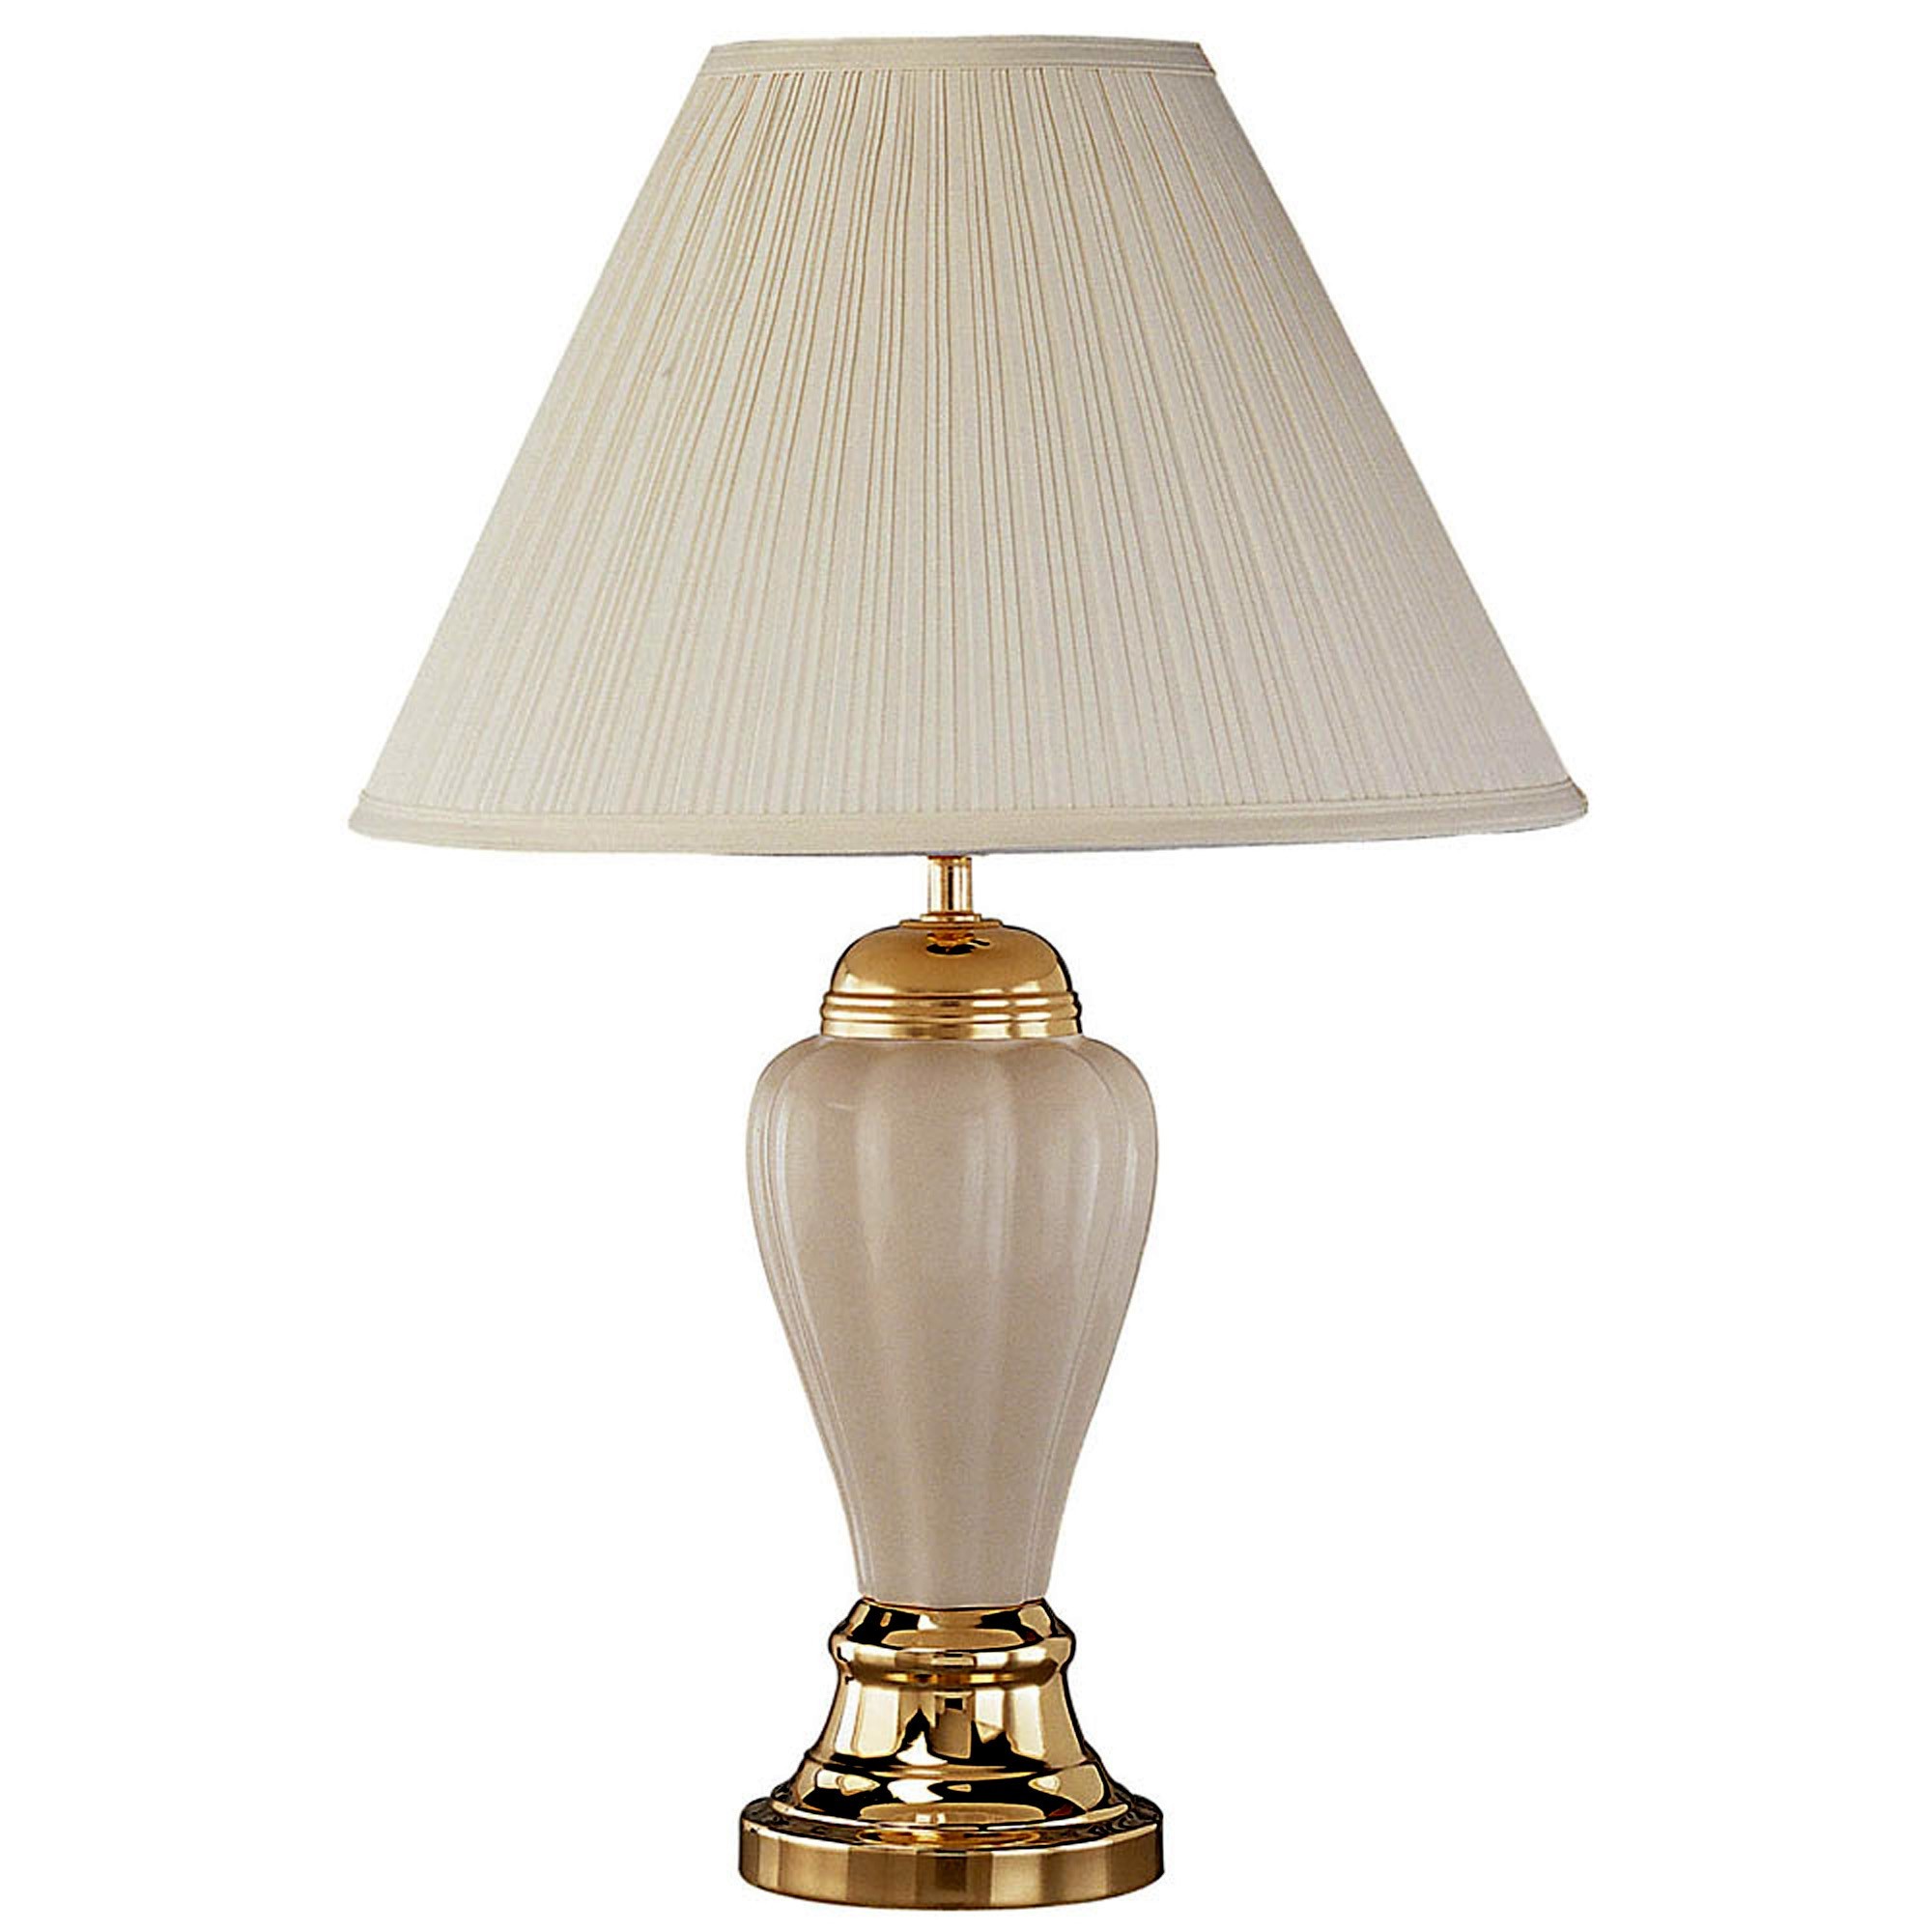 27" Beige Ceramic Bedside Table Lamp With Off-White Shade-468527-1